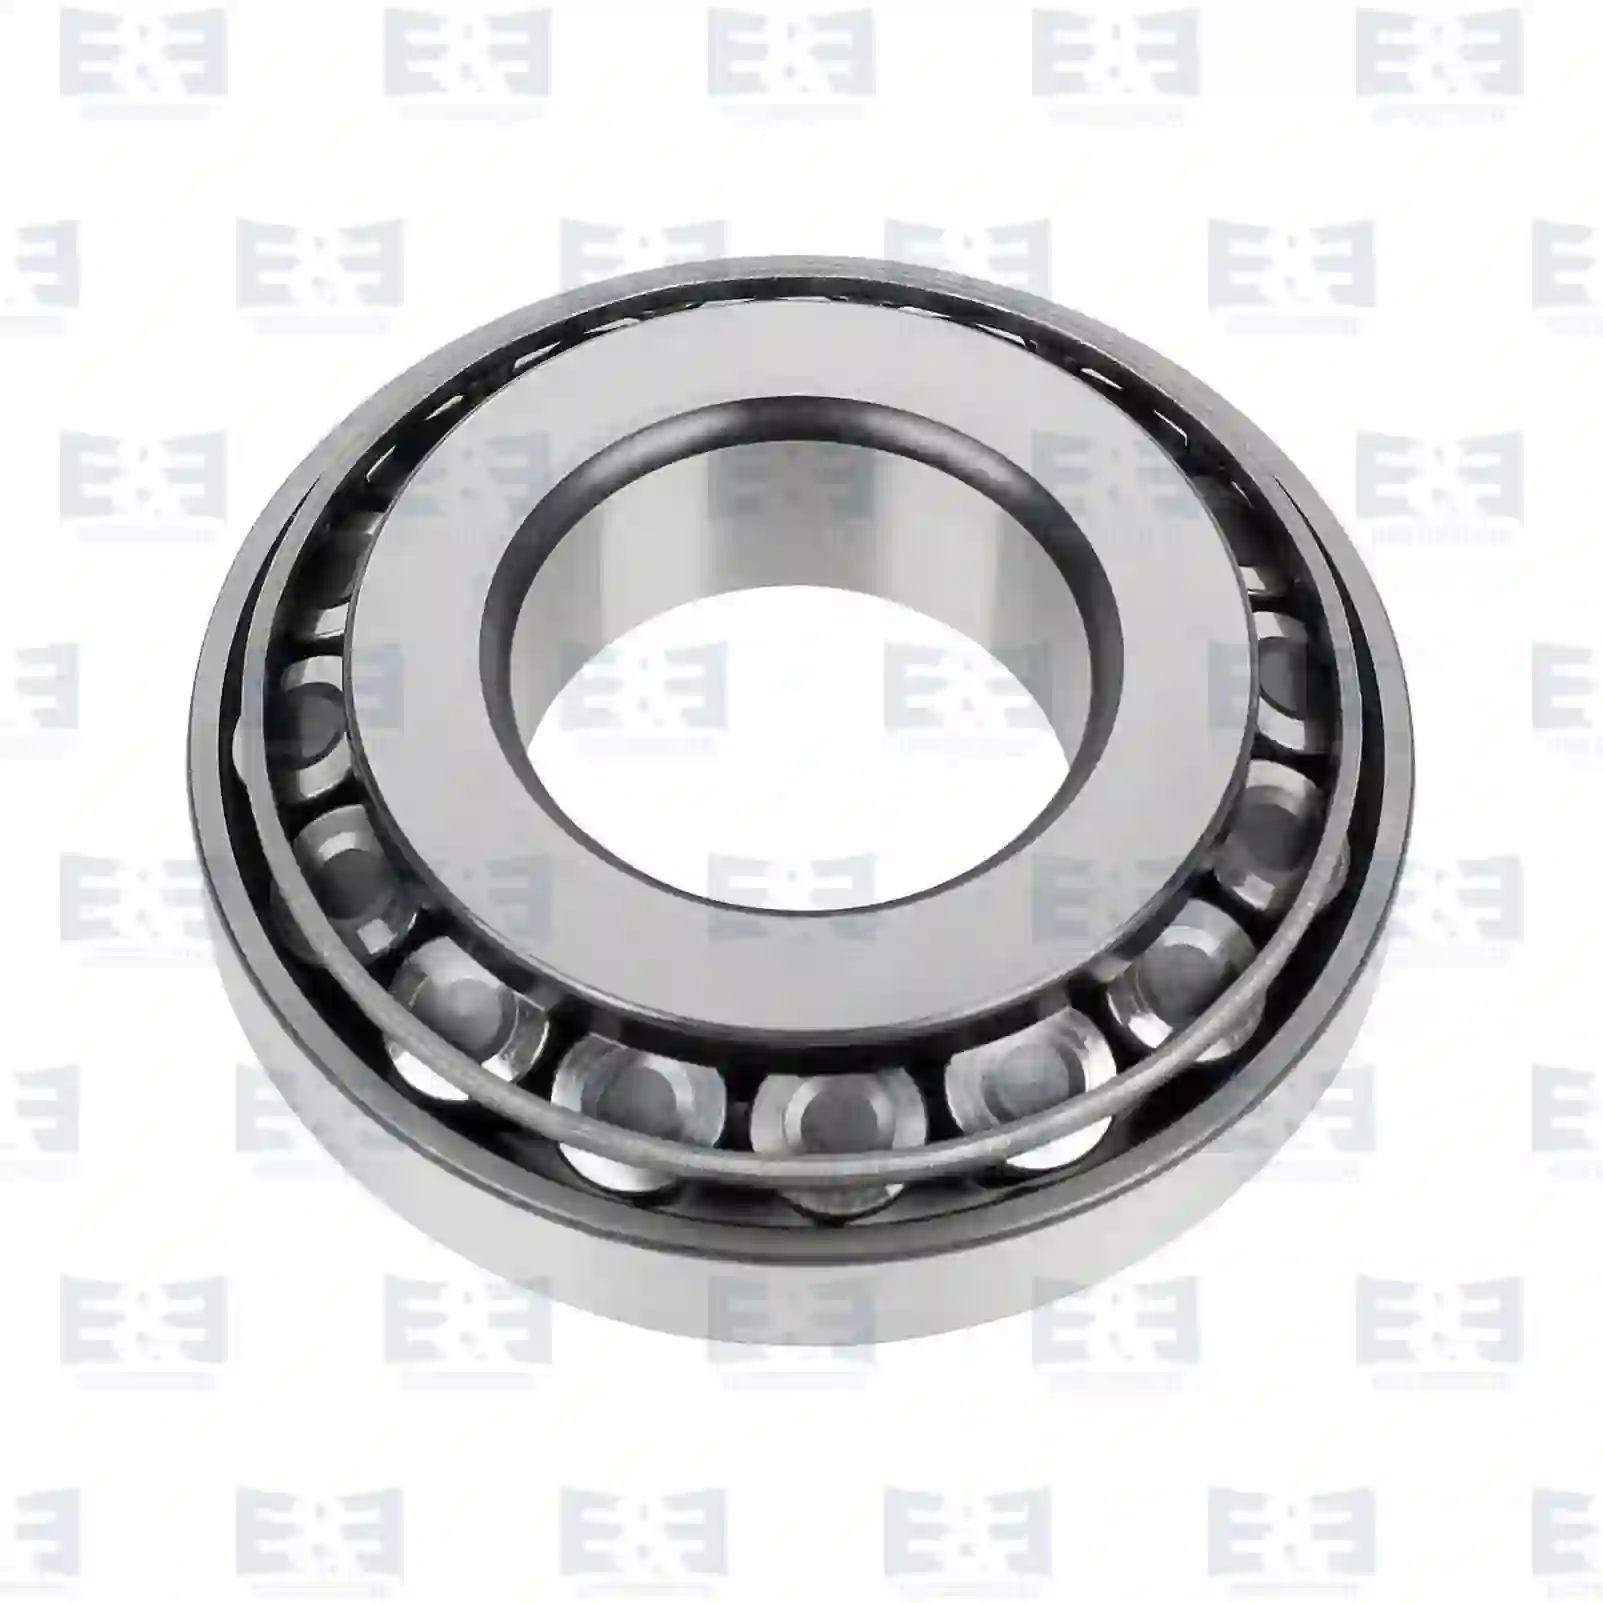 Bearings Tapered roller bearing, EE No 2E2286219 ,  oem no:384810, 06324905900, 06324990022, 06324990088, 64934200028, 64934200032, 81934200097, 87523500900, 0019800502, 0029814505, 0039810605, 0139816205, 0189819205, 9429810405, 129289, 2V5501319A E&E Truck Spare Parts | Truck Spare Parts, Auotomotive Spare Parts